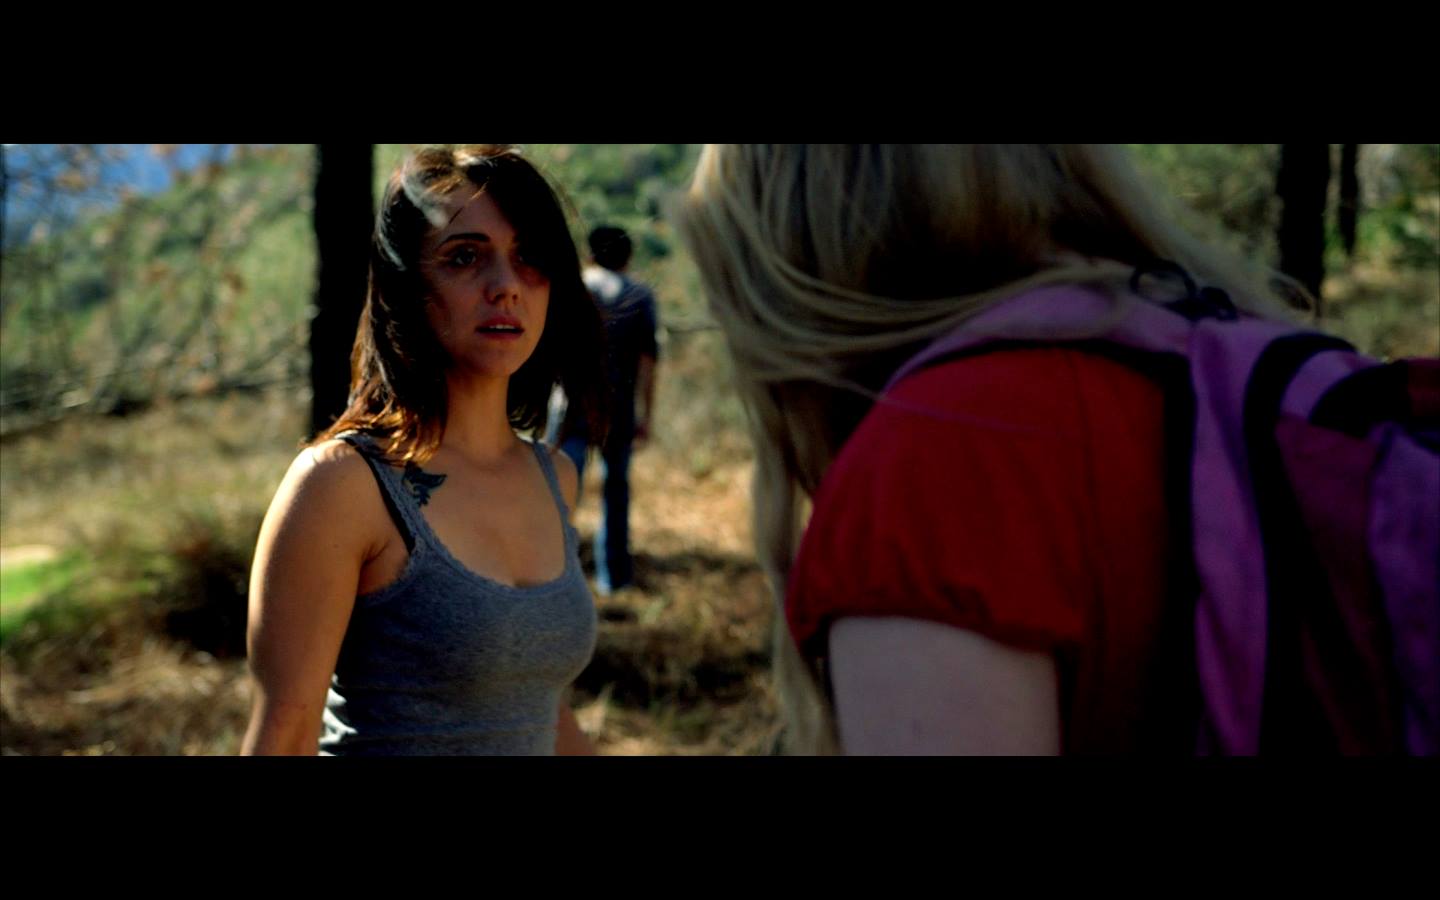 On location for 'THE WOODSMAN', co-starring Sonya Kreuger. Directed by Paul Leach, Harbinger Entertainment